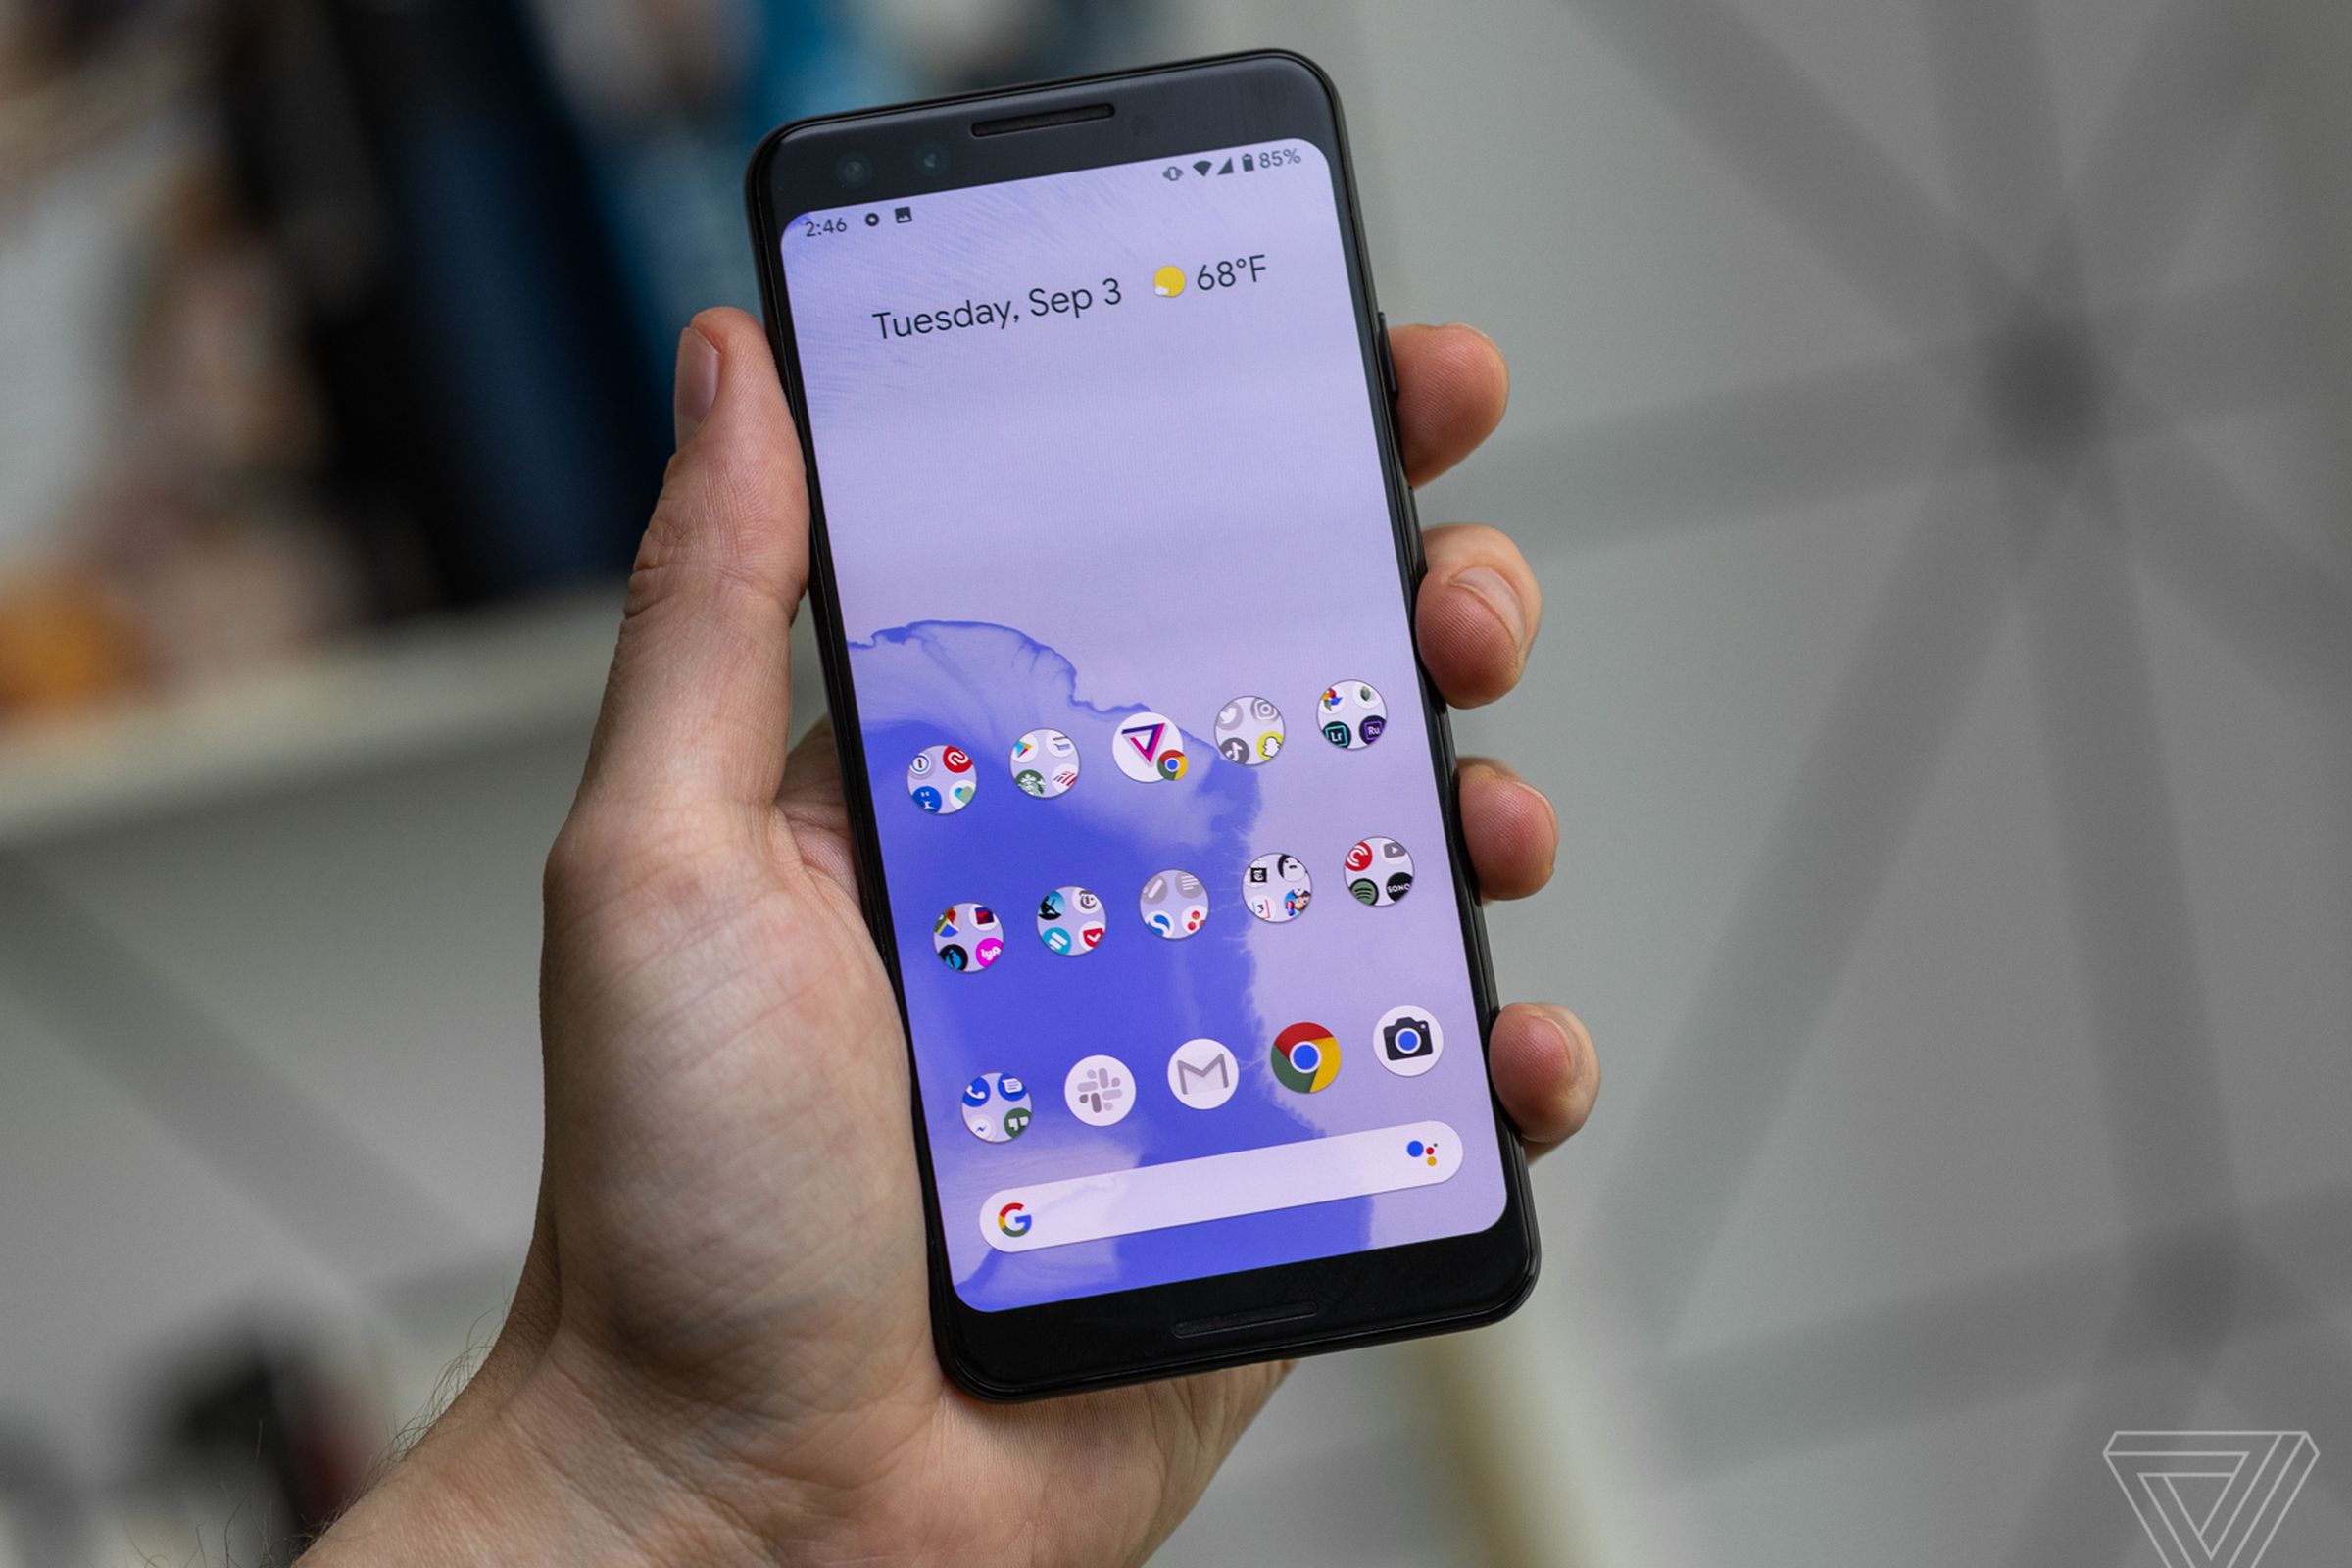 Android 10 Home Screen with some icons grayed out in Focus Mode